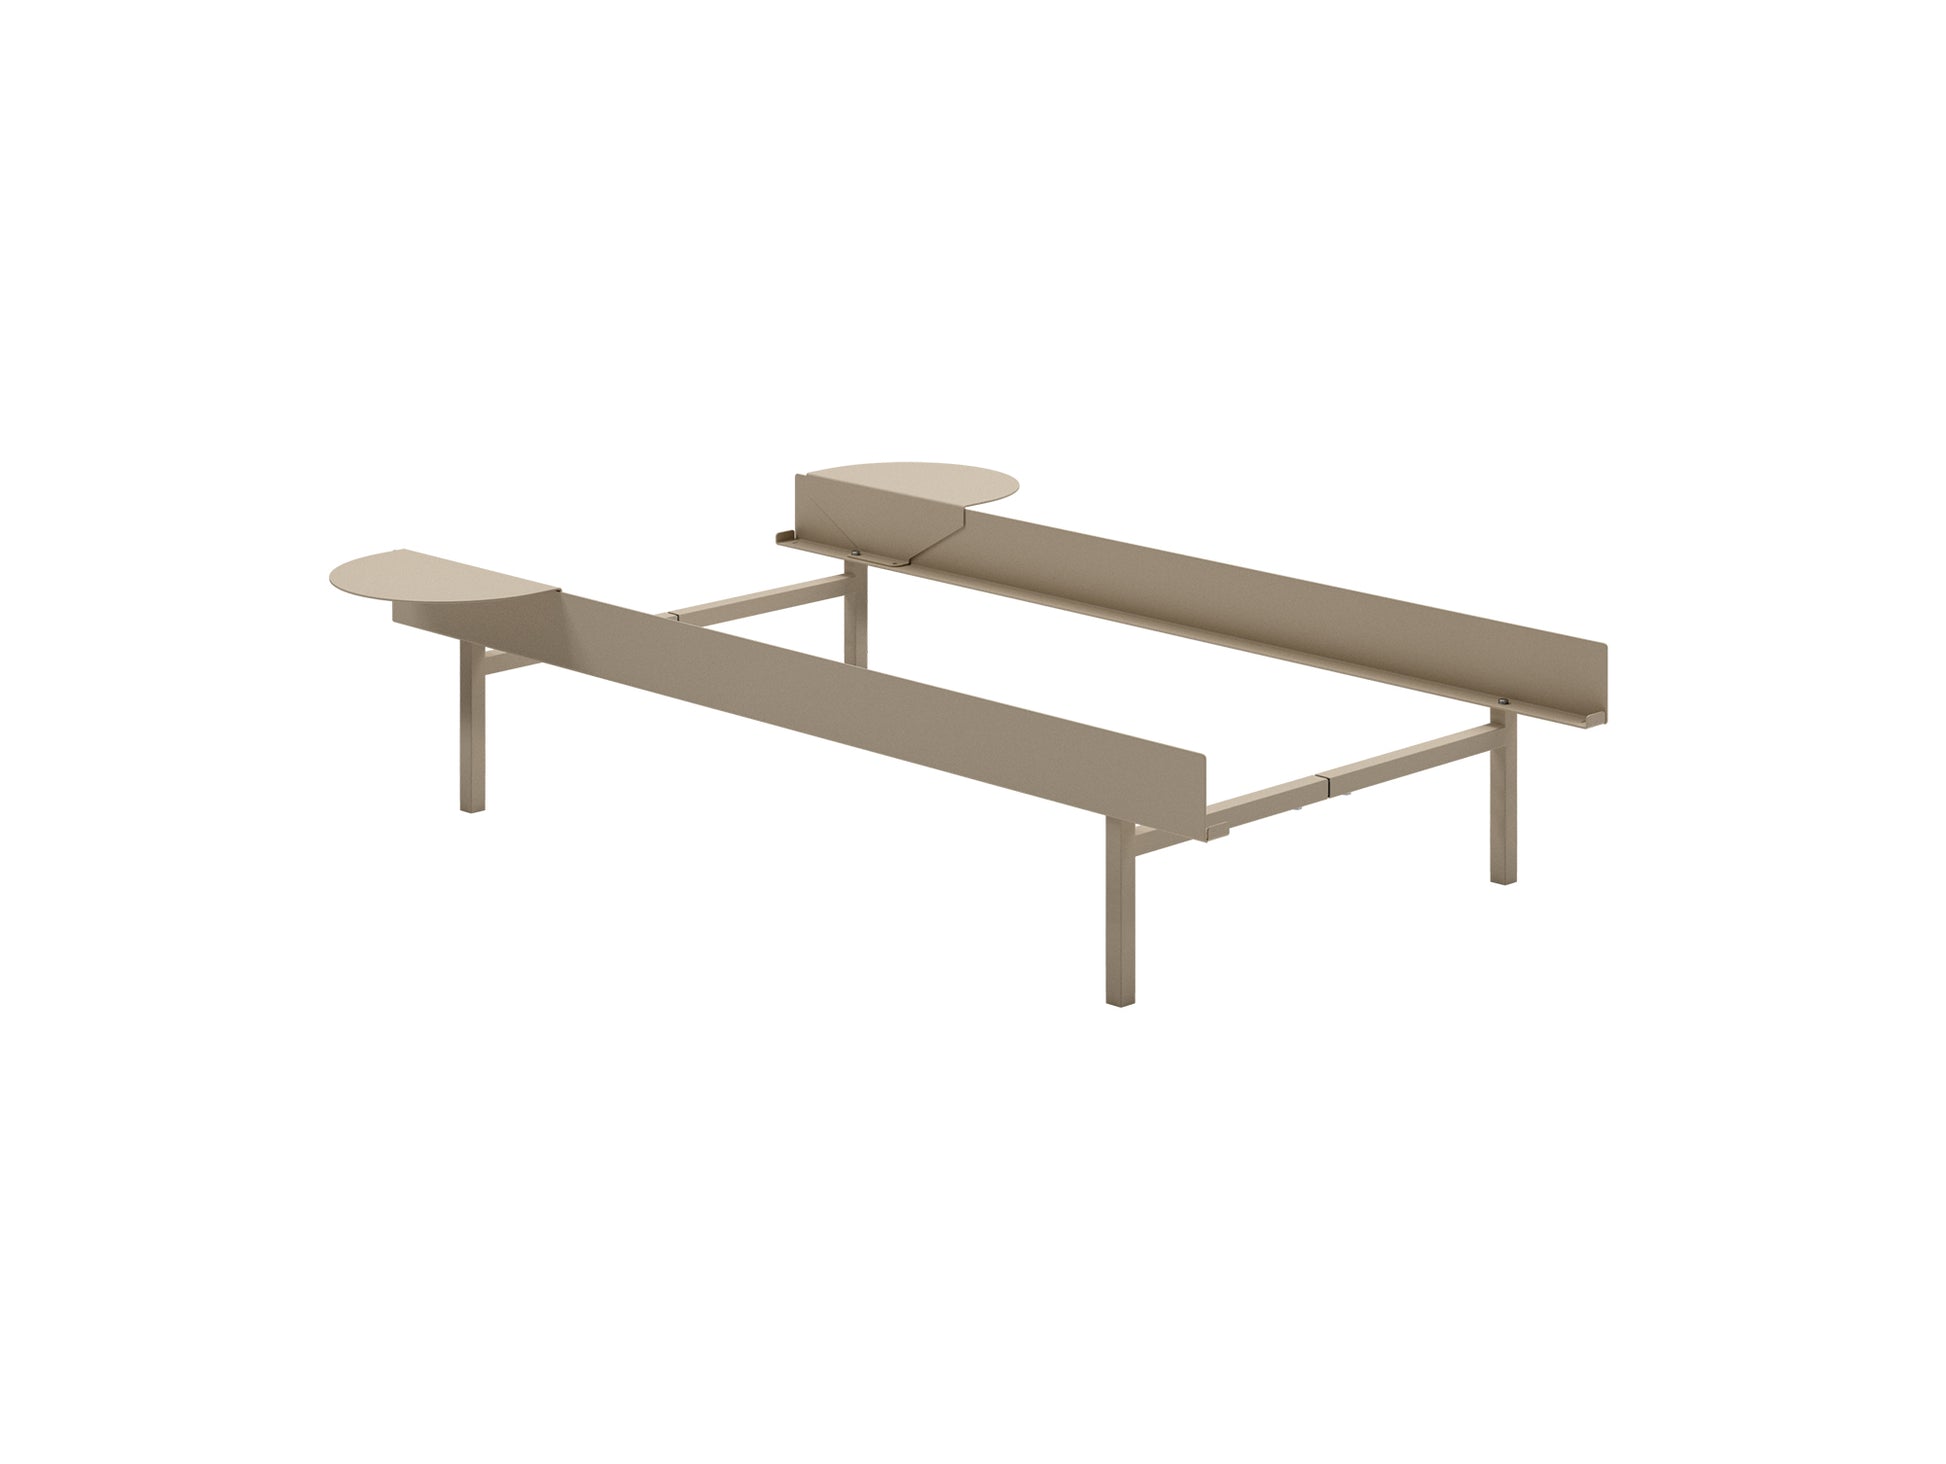 Bed 90 - 180 cm (High) by Moebe- Bed Frame / with NO SLATS / 2 Side Table / Sand